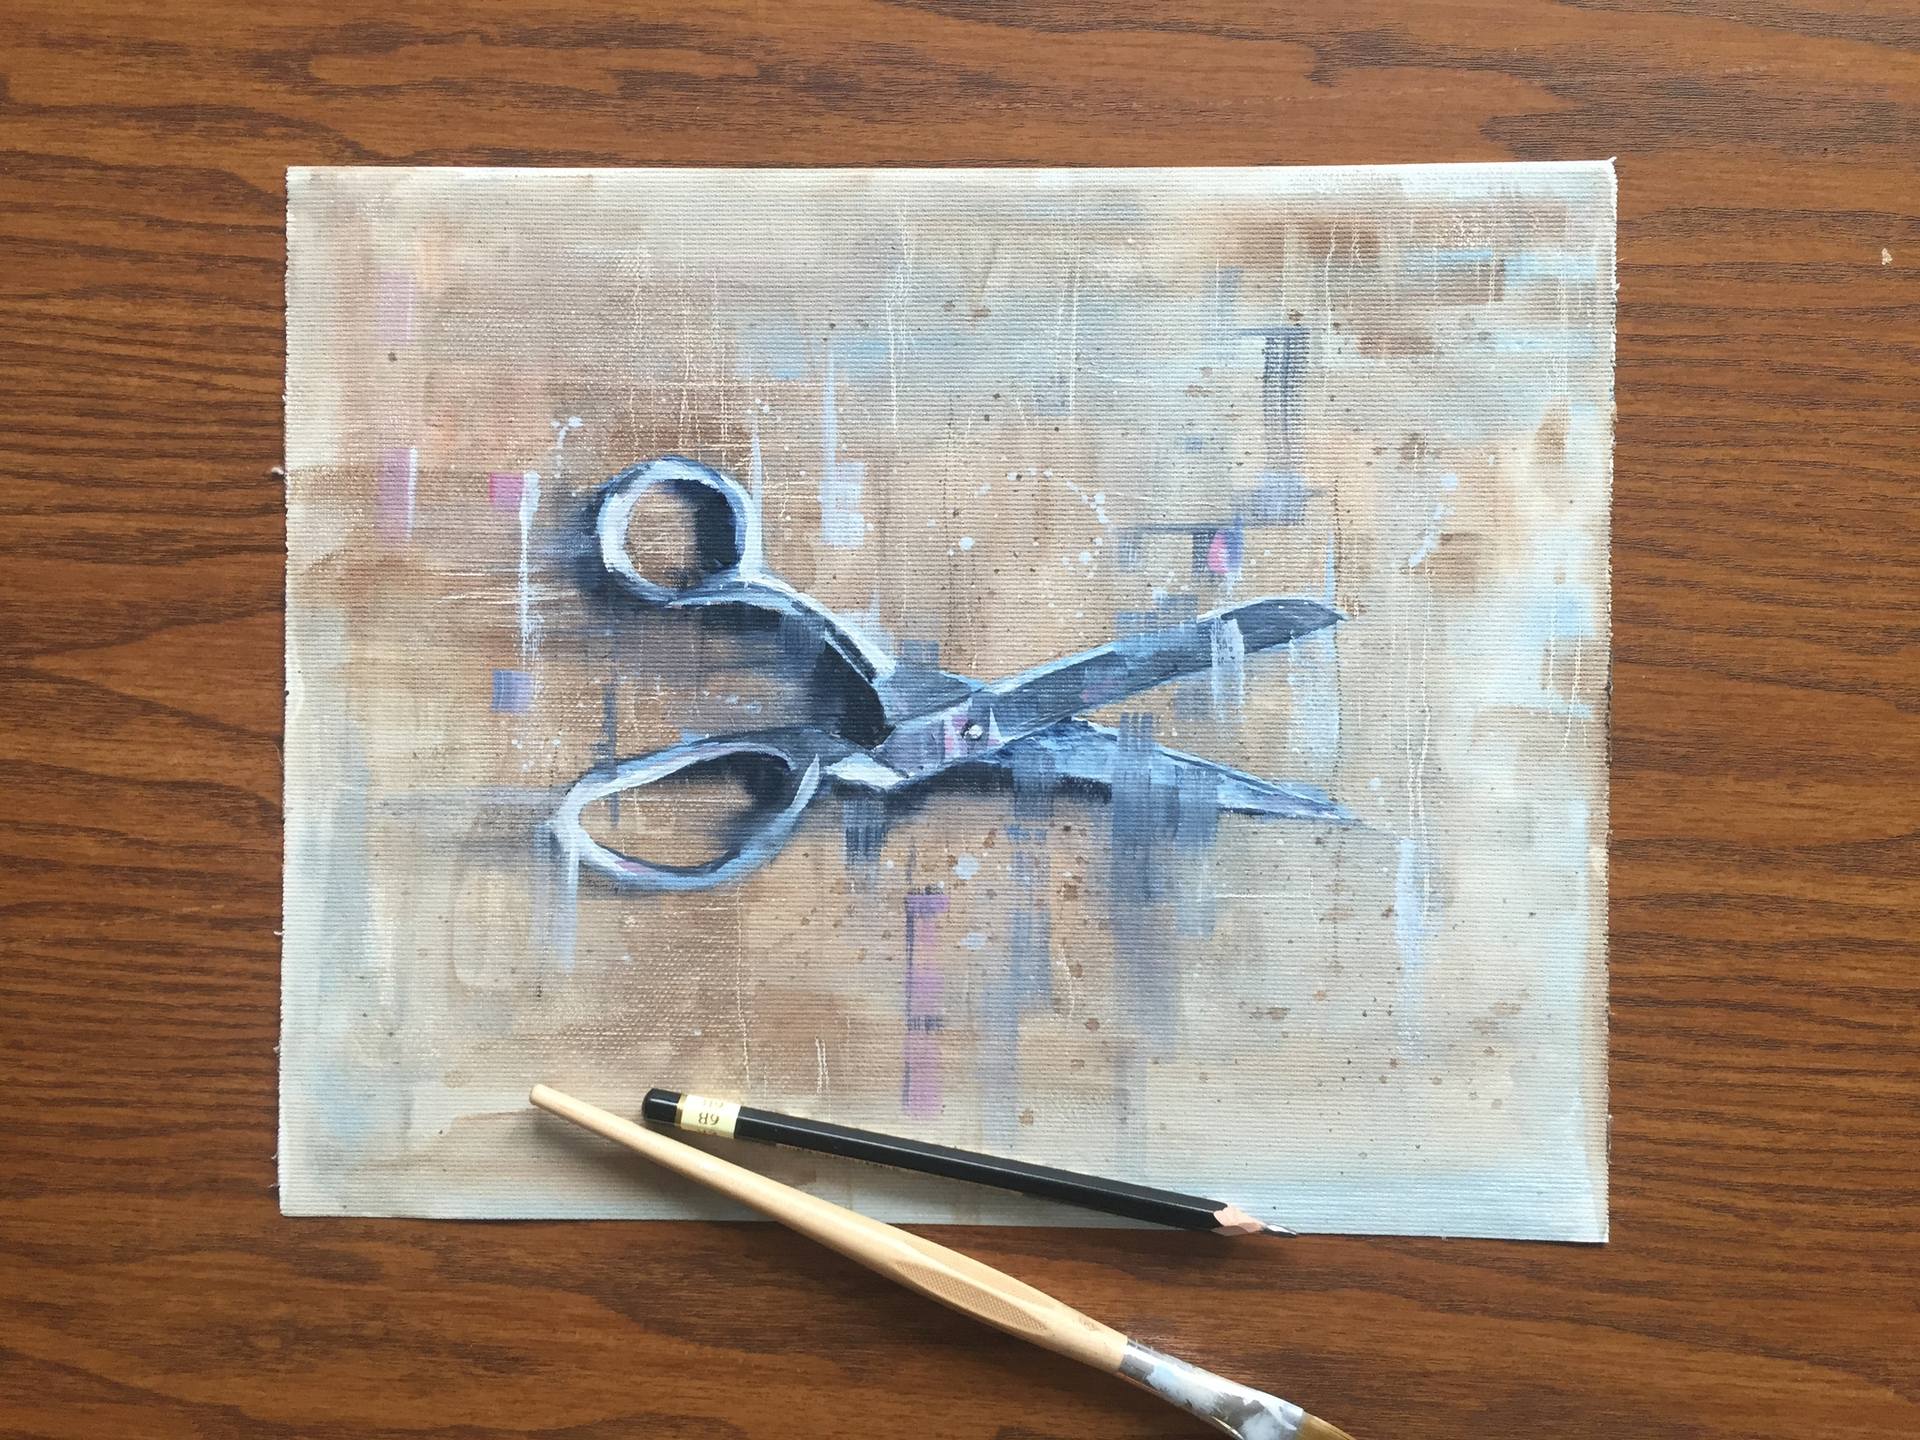 Sewing Scissors Painting by Jiri Zraly